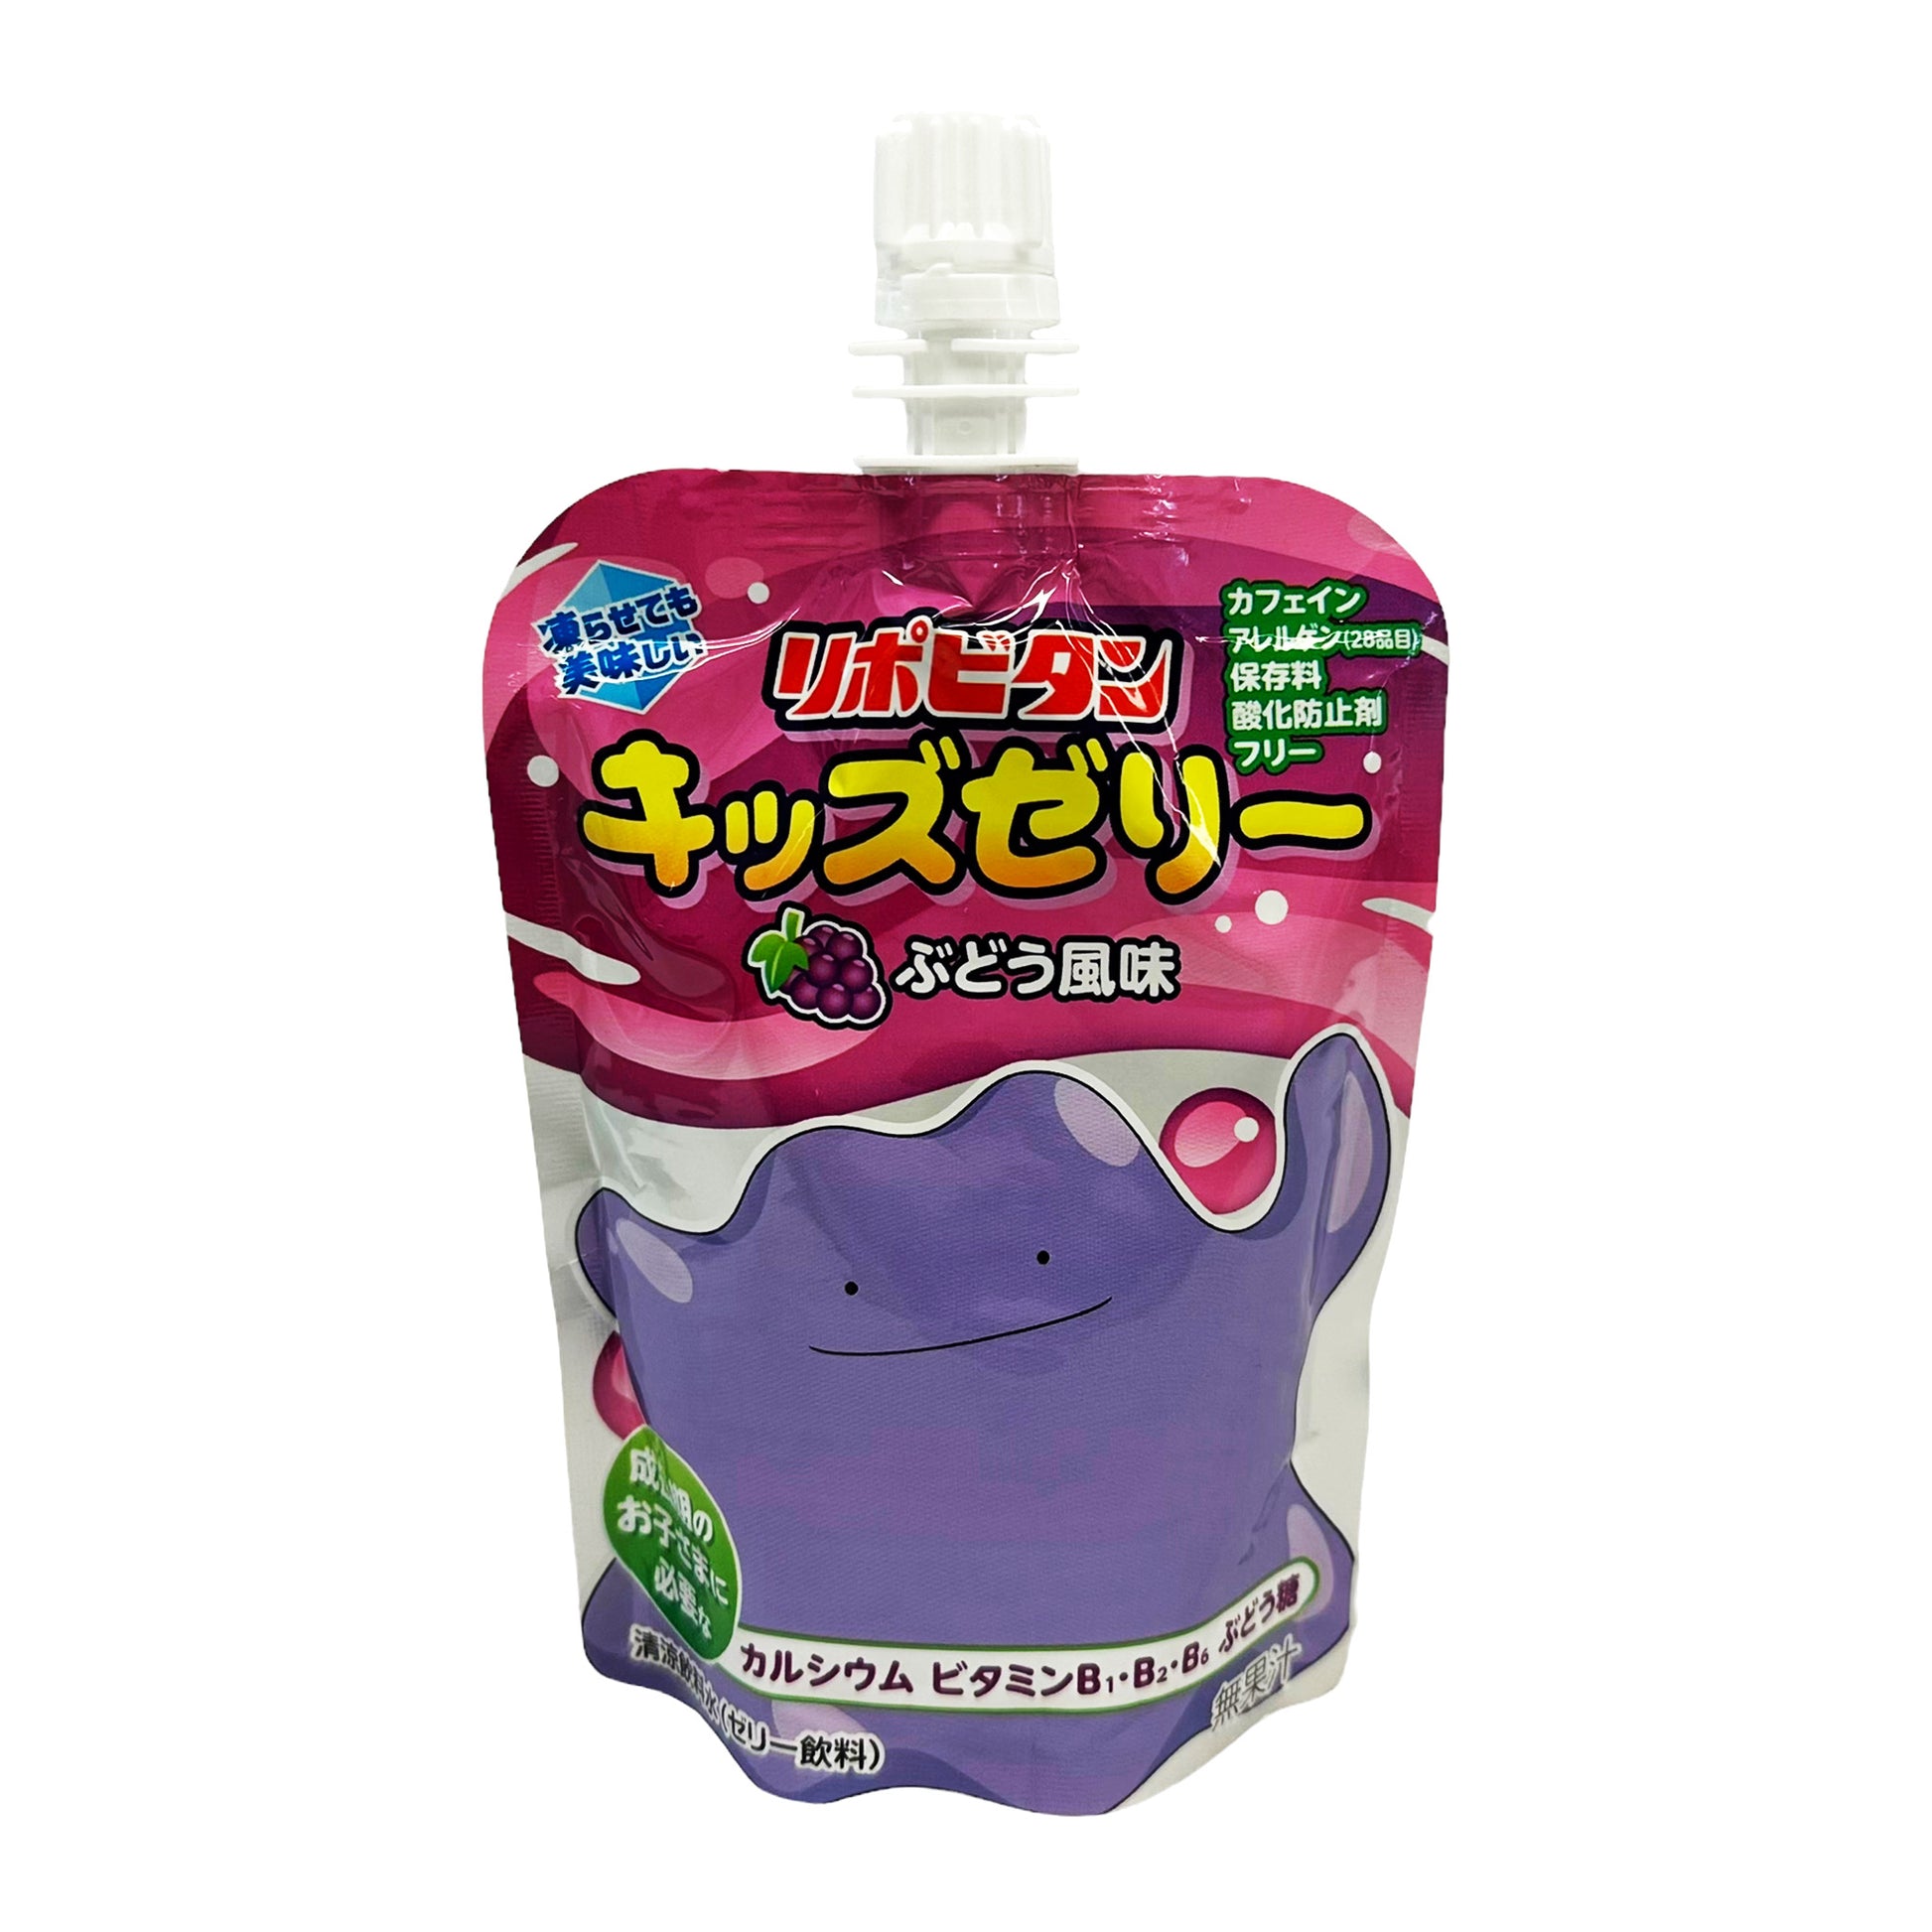 Front graphic image 2 of Taisho Pokemon Jelly Drink - Grape 4.4oz (125g)